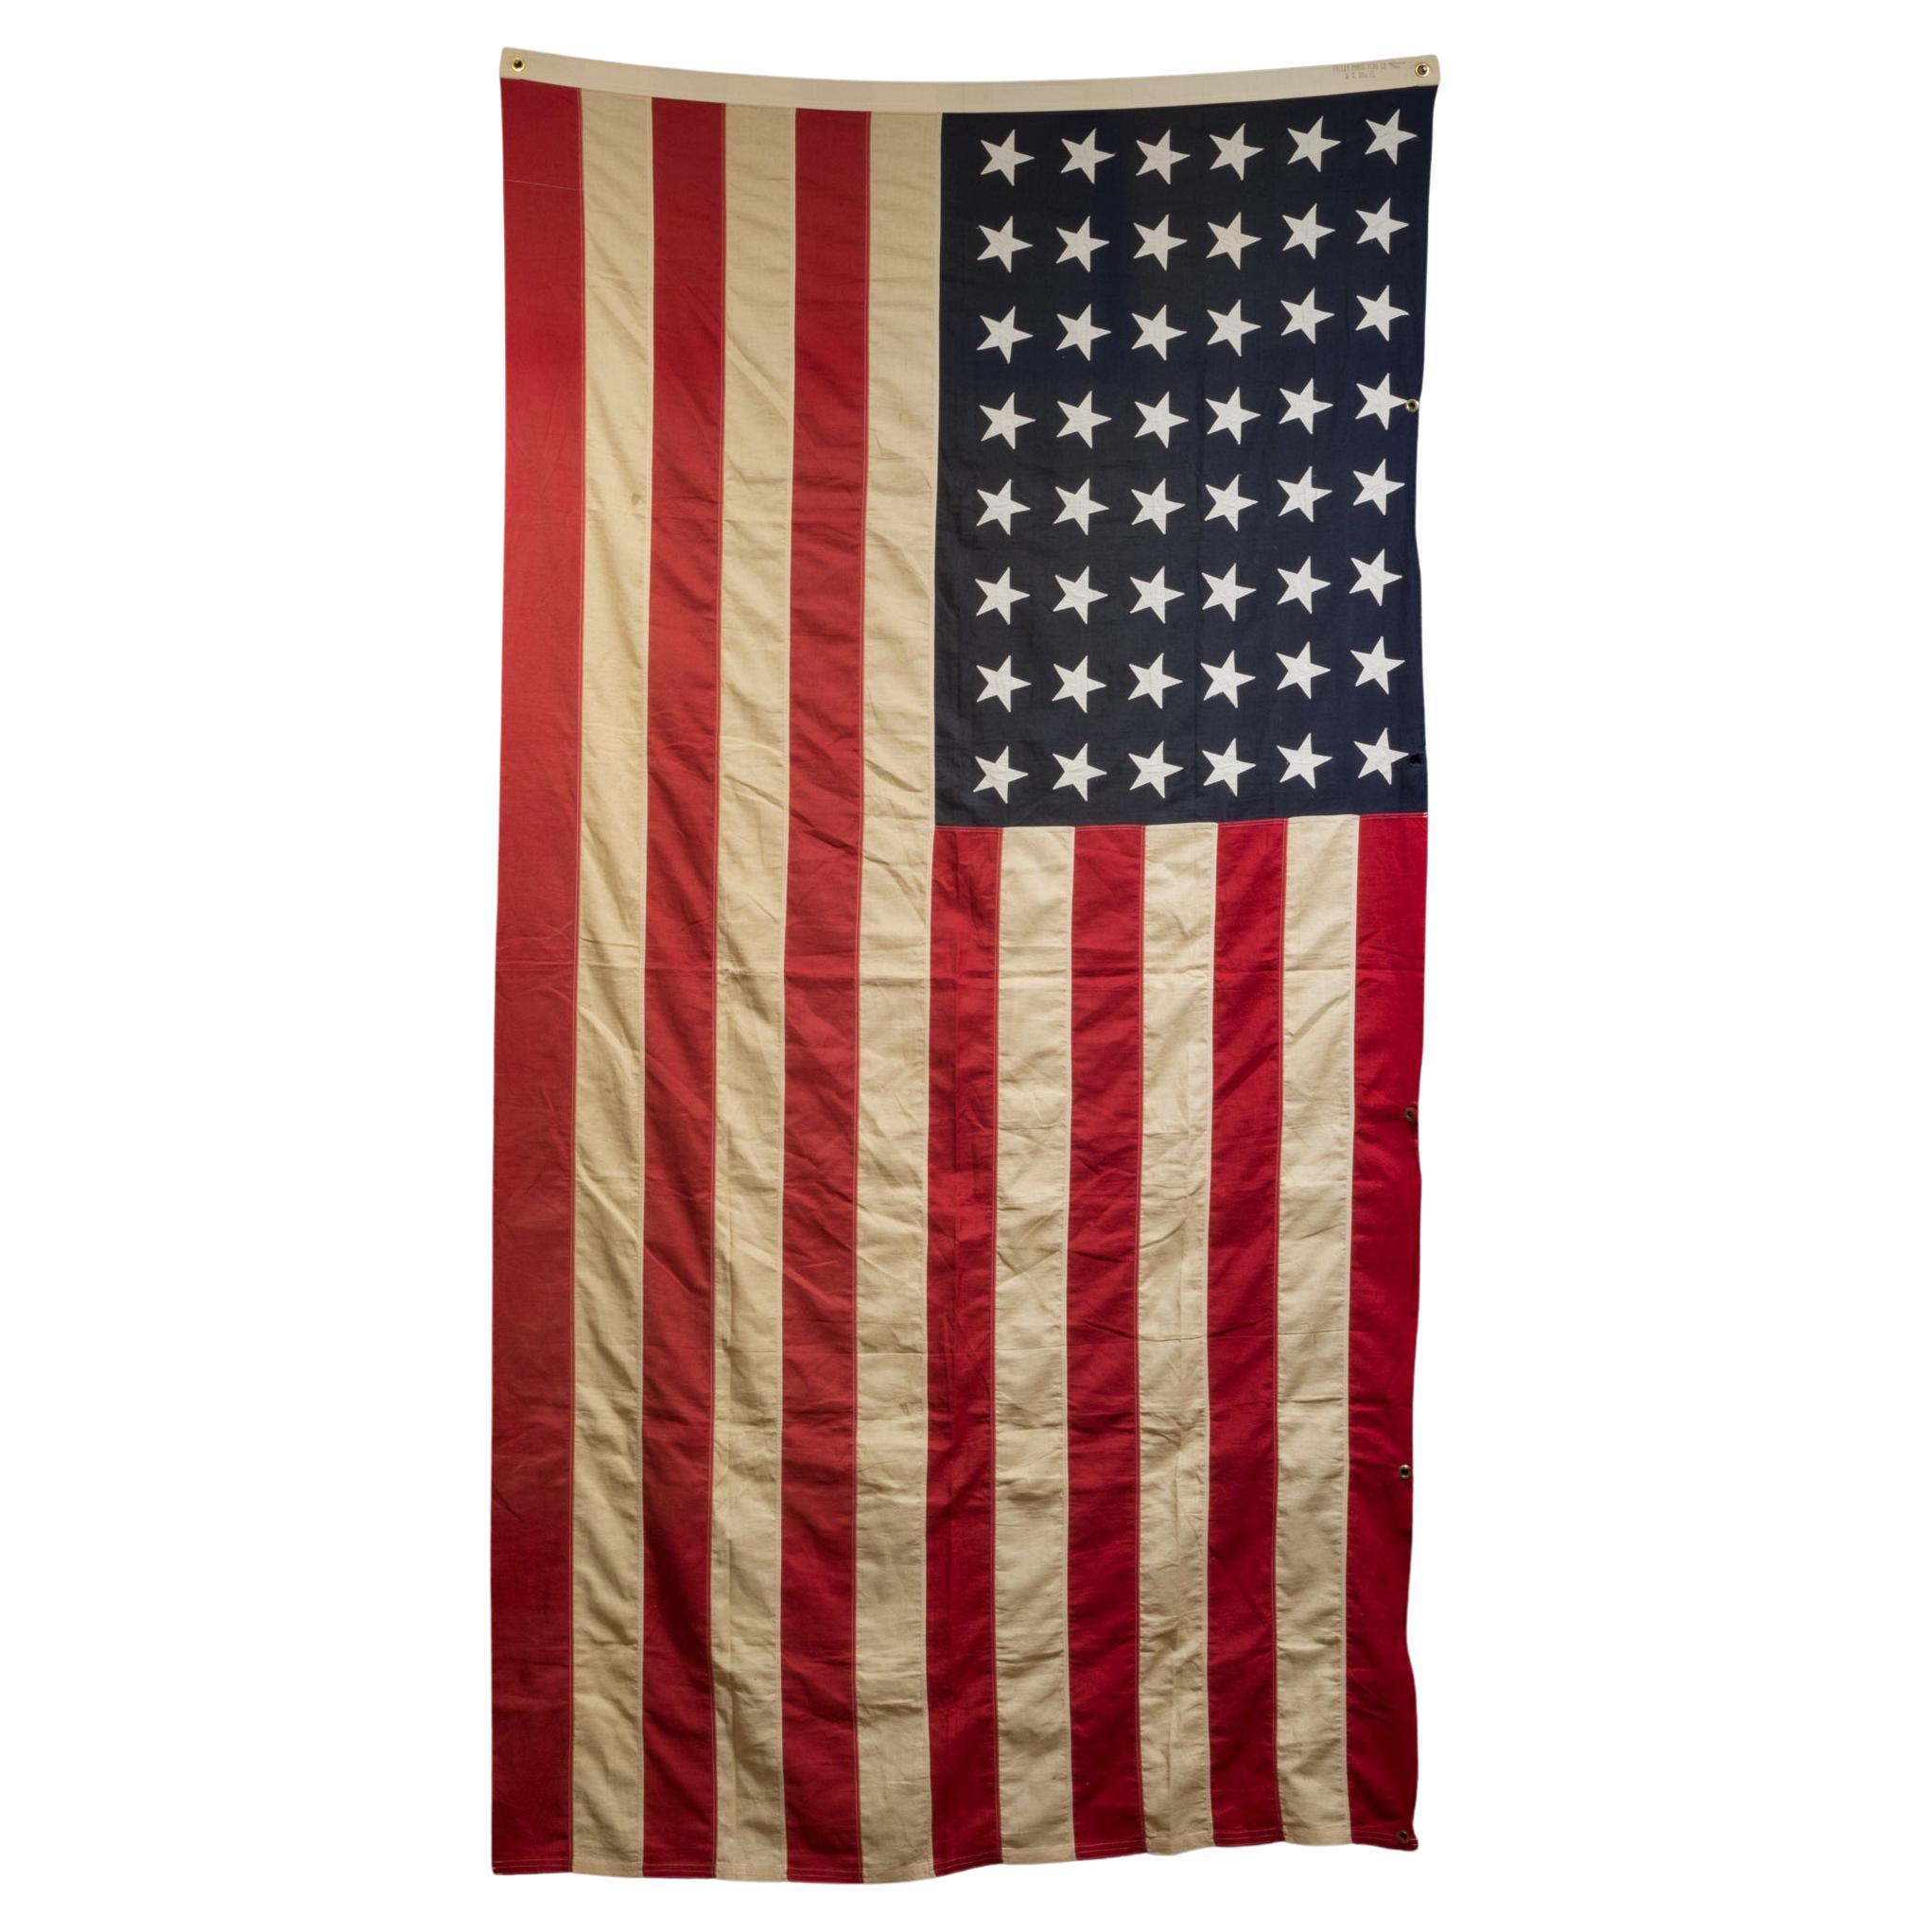 Early 20th C. Monumental "Valley Forge" American Flag with 48 Stars, c.1940-1950